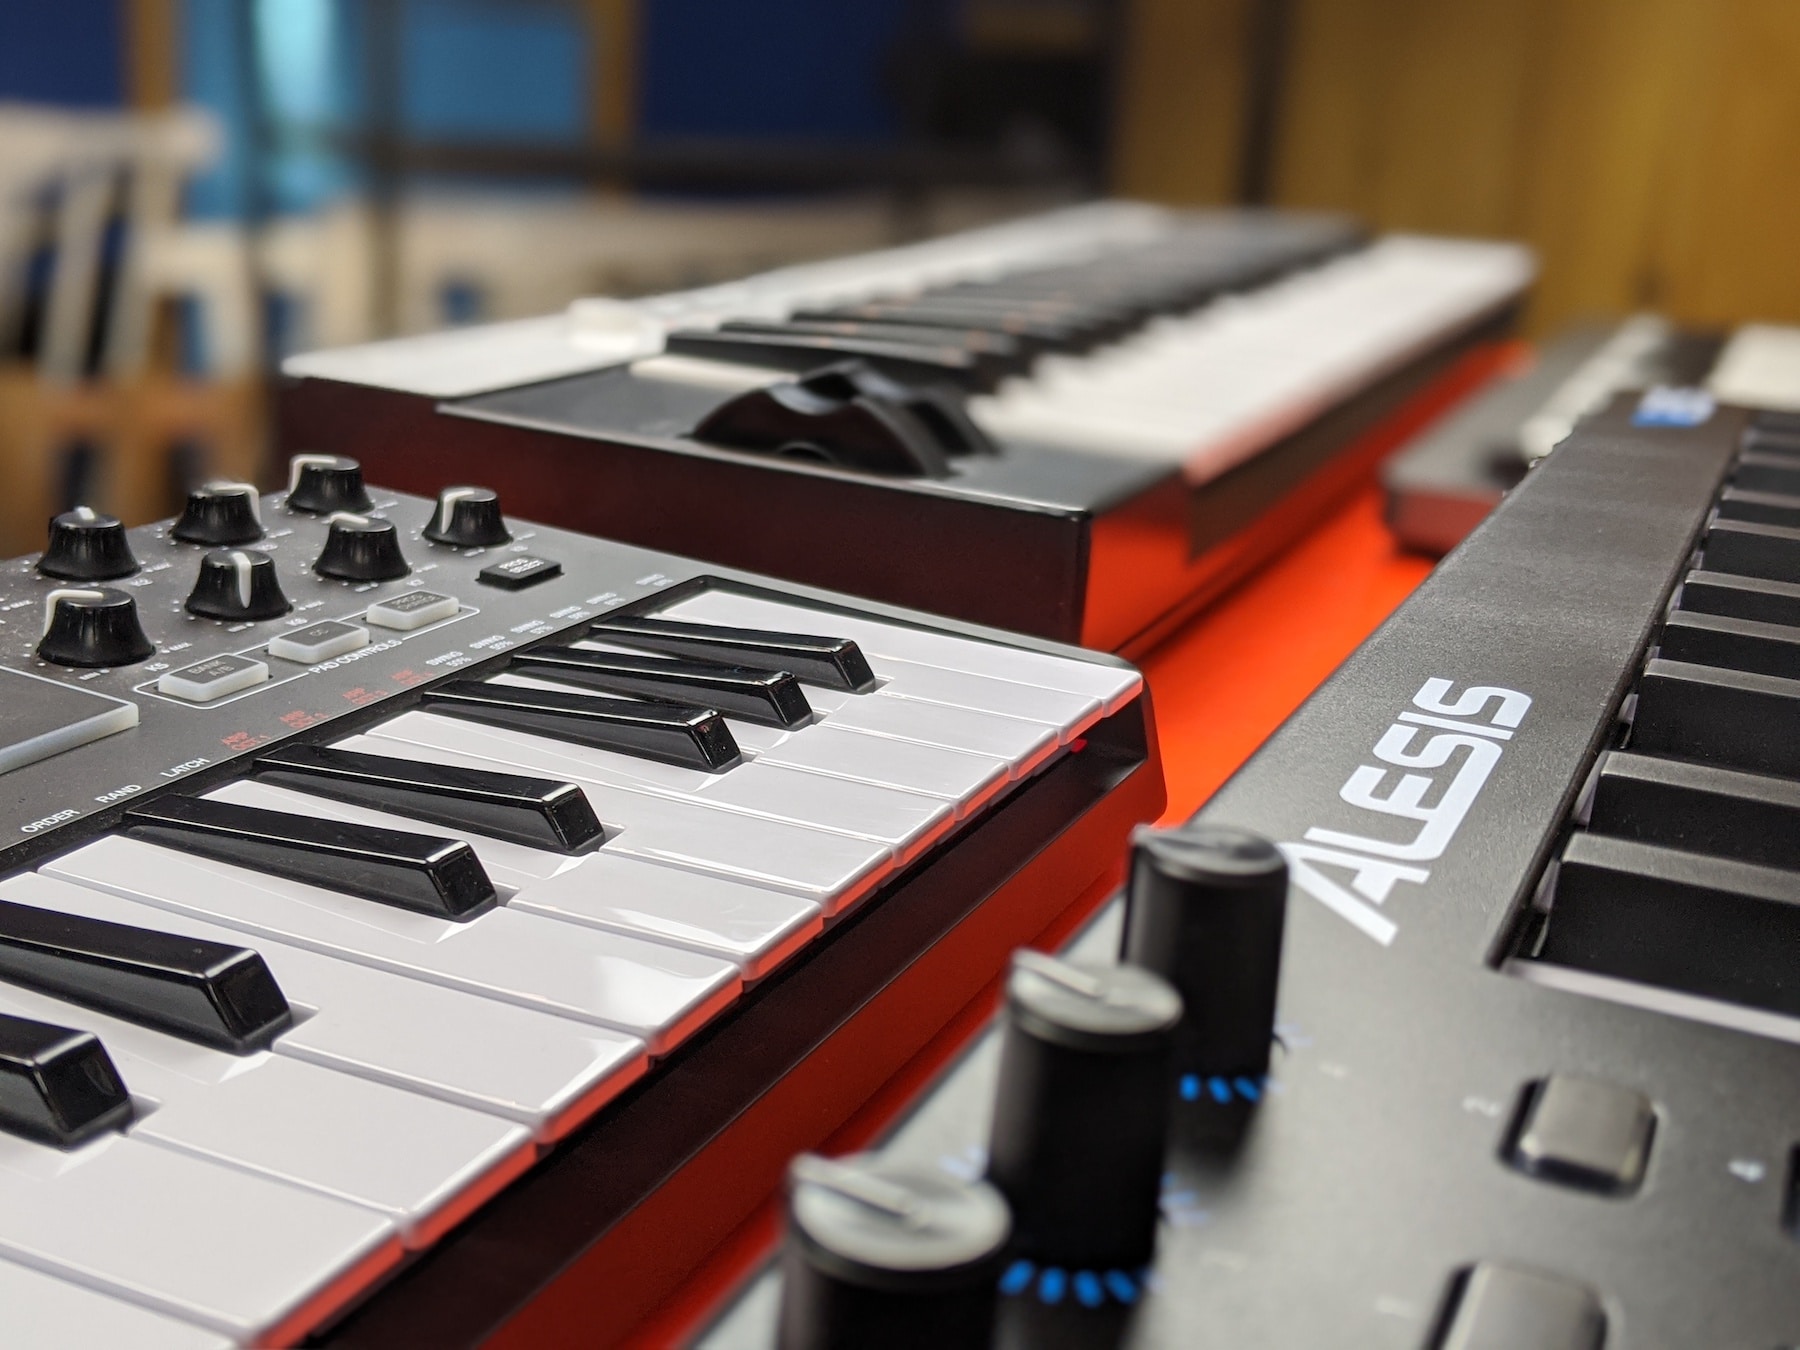 How To Use Garageband With A MIDI Keyboard